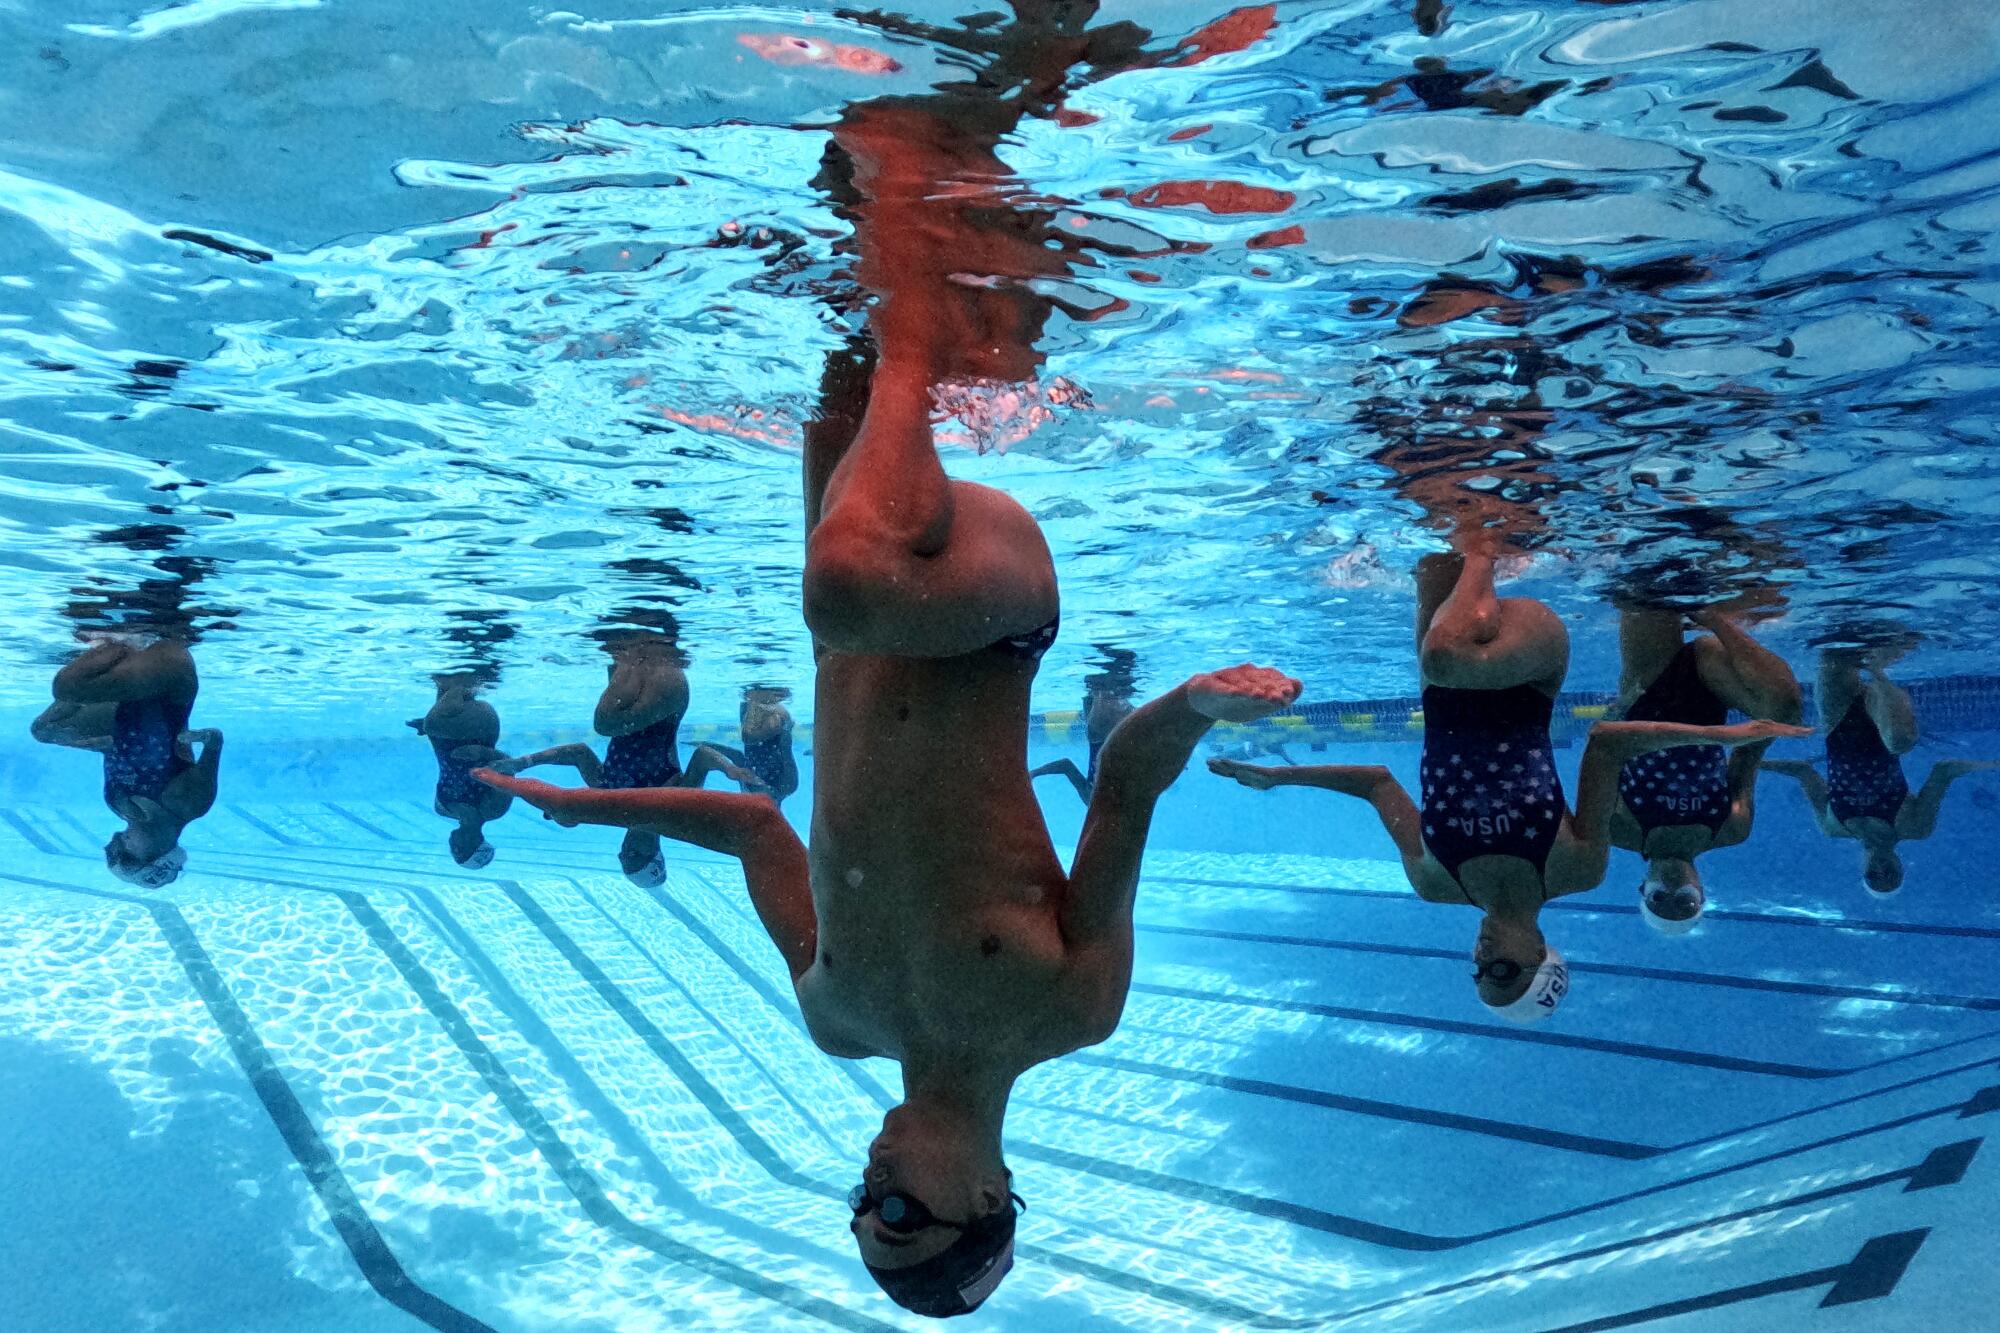 The USA Artistic Swimming team, including Kenny Gaudet, practices at UCLA in September.